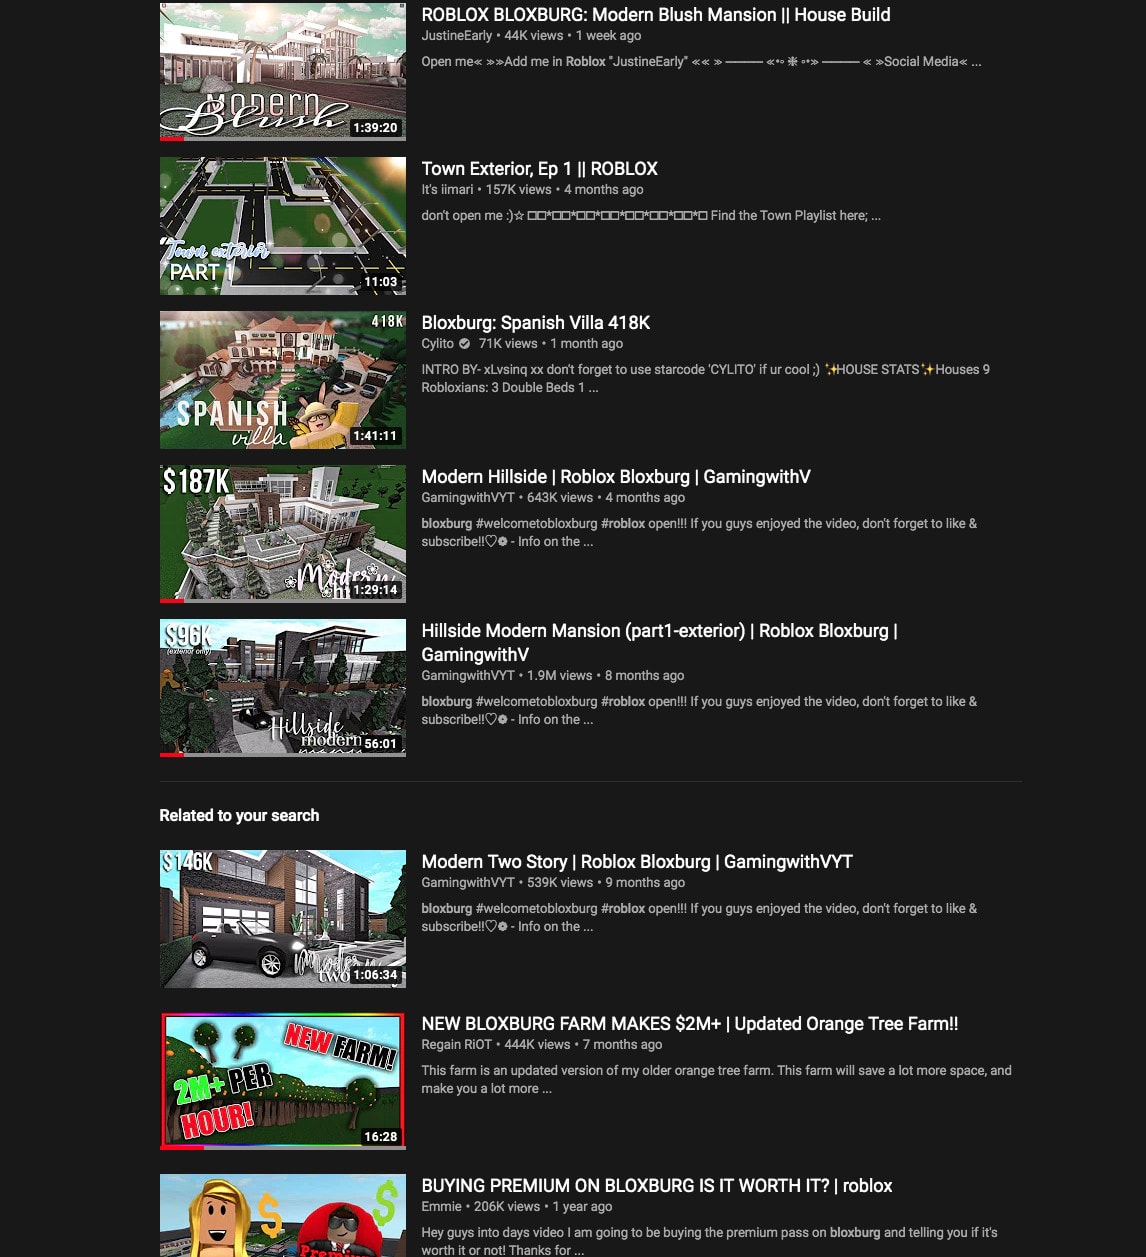 Build You A Bloxburg Mansion From Yt By Rm1781 Fiverr - roblox bloxburg cylito